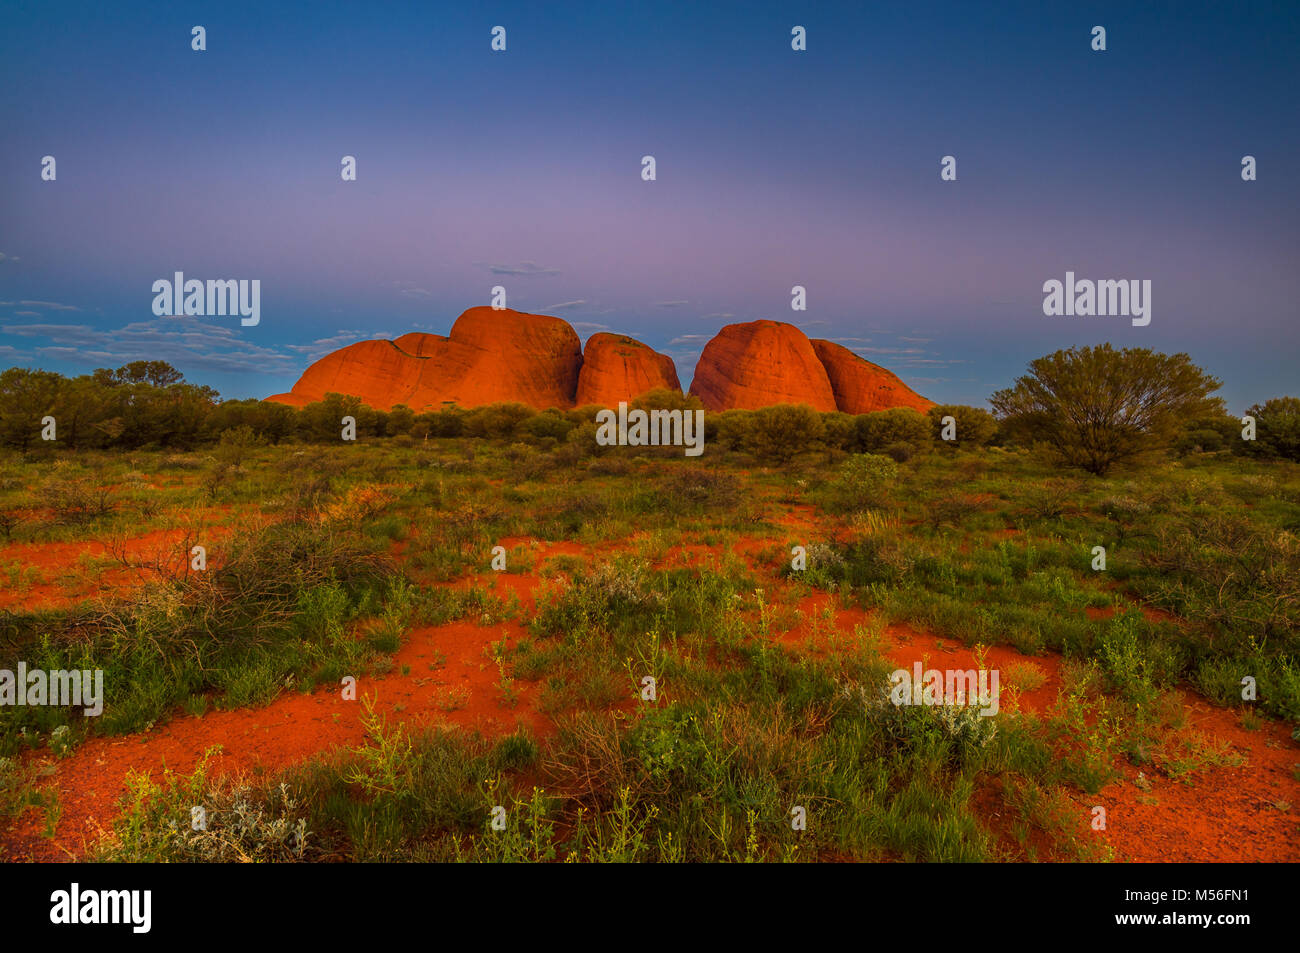 Red soil and red domes of Kata Tjuta. Stock Photo